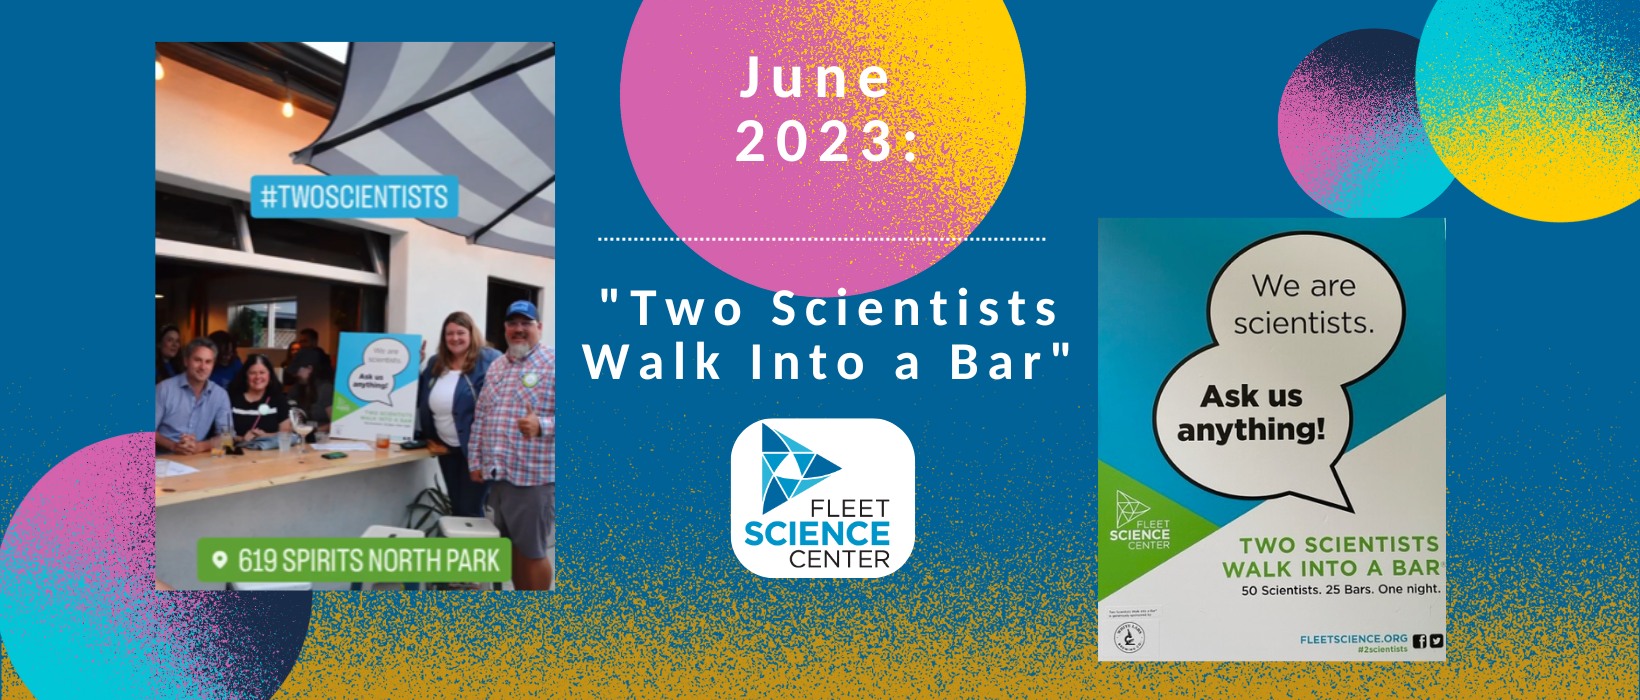 4 of 7, June 2023- Two Scientists Walk Into a Bar Event. One picture shows Taylor Berninger with other scientists around their sign at 619 Spirits in North Park, waiting to talk to patrons. Another picture is a close up of the sign depicting quote bubbles stating "We are Scientists- Ask us Anything!" with the Fleet Science Center logo and promoting the hashtag #2Scientists.